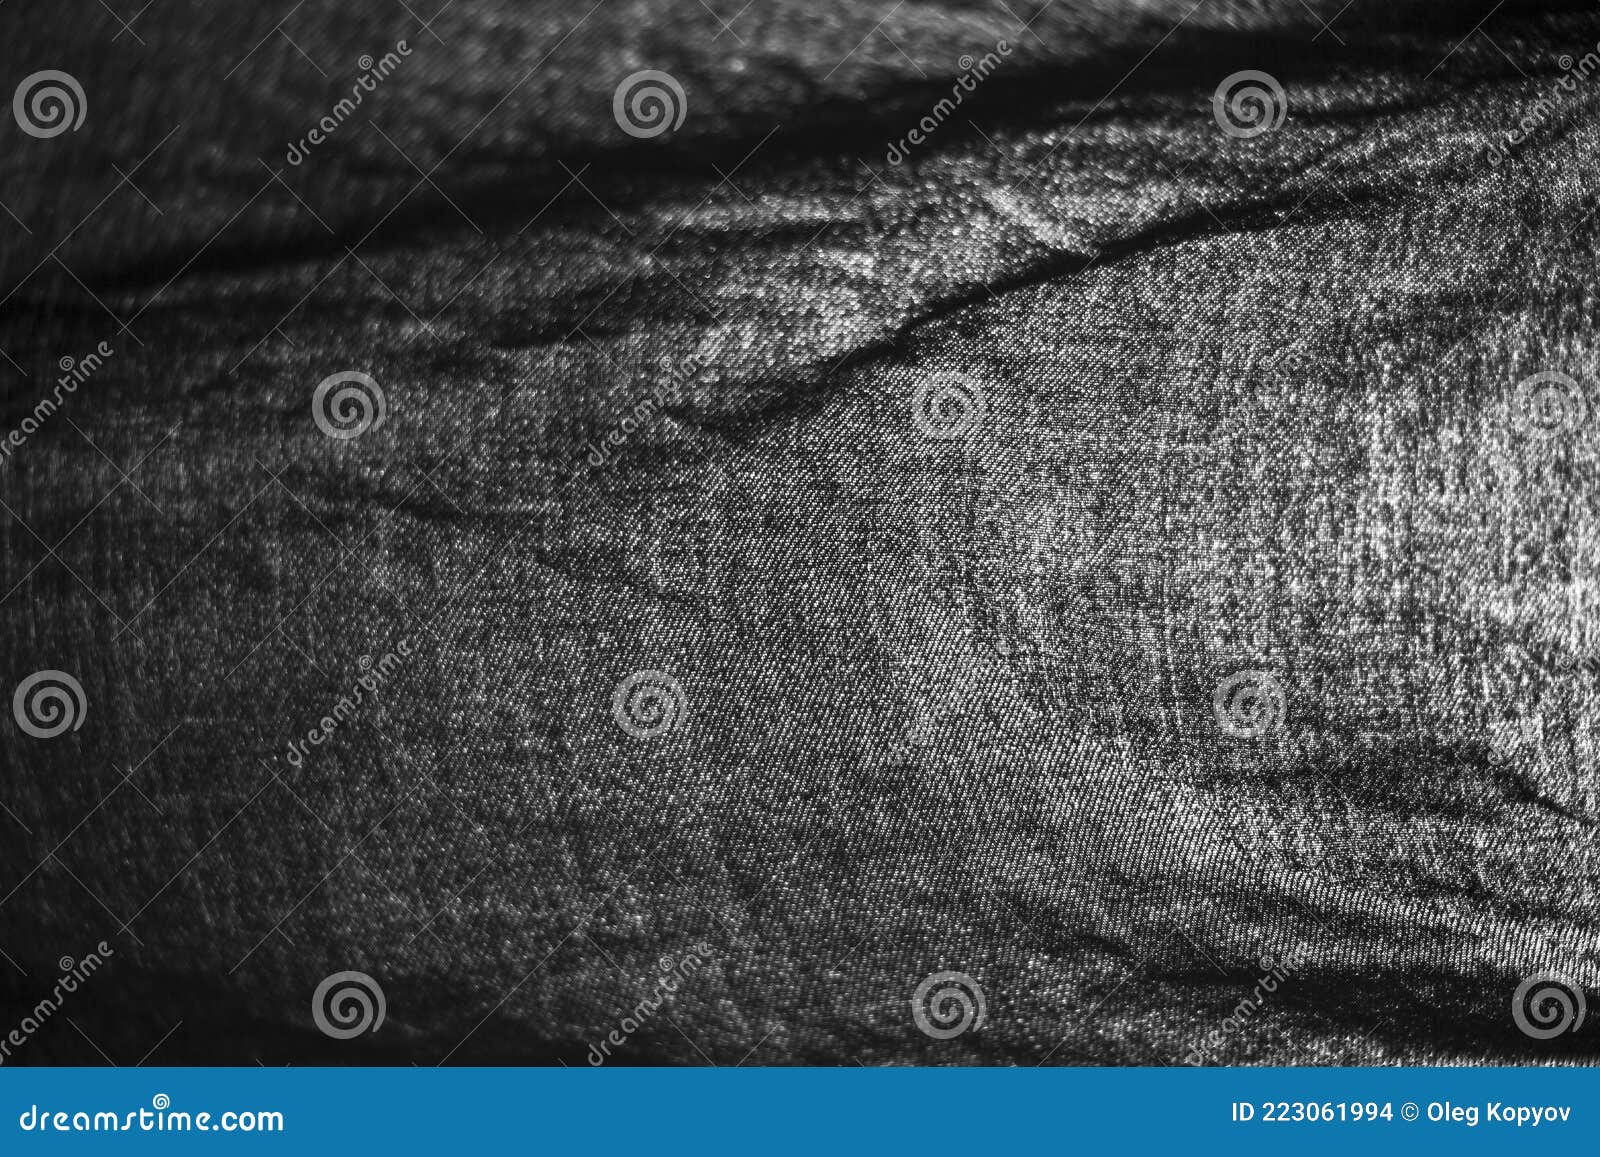 The Texture of Black Fabric. Light through the Fabric Stock Photo ...